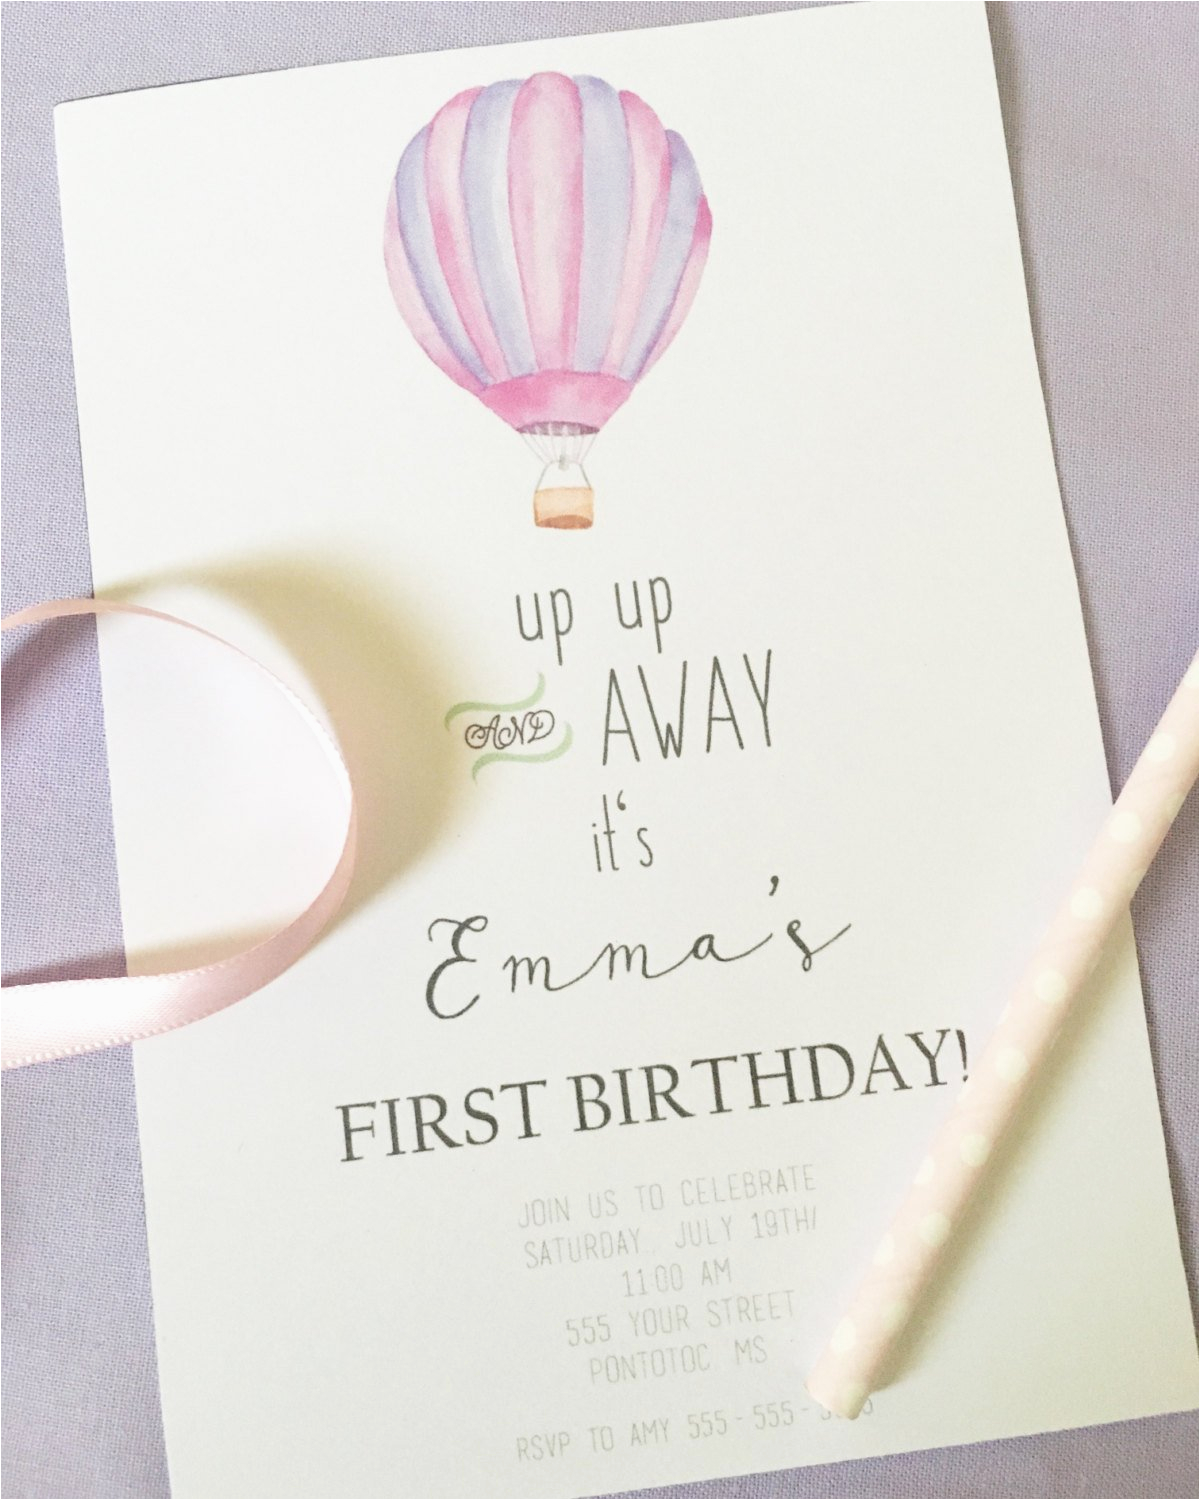 Up Up and Away Birthday Invitations Up Up and Away Invitation Children 39 S Birthday Invitation